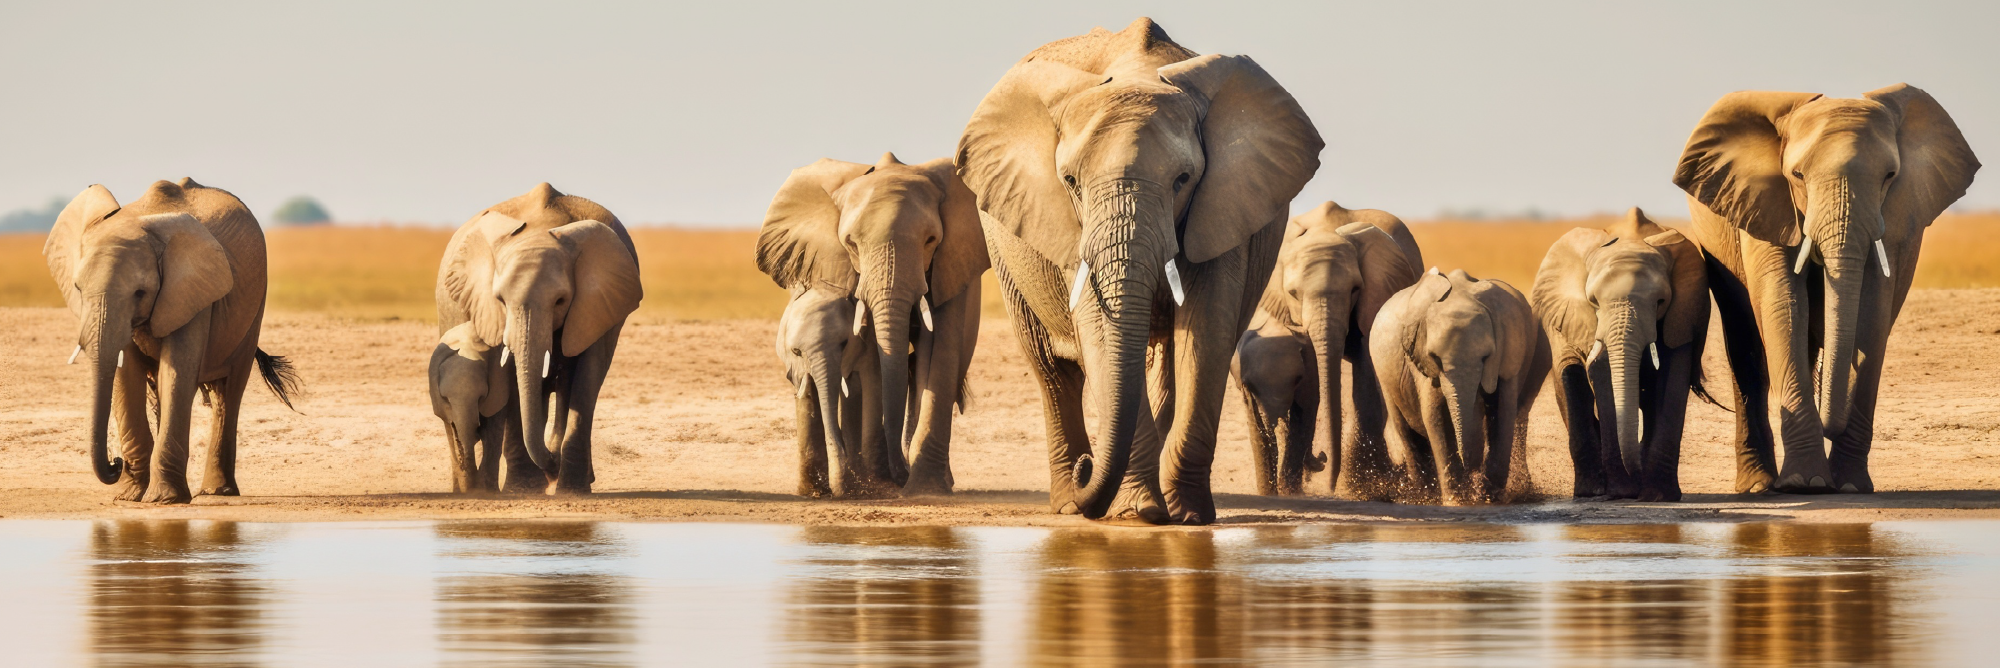 Elephants at the proverbial watering hole